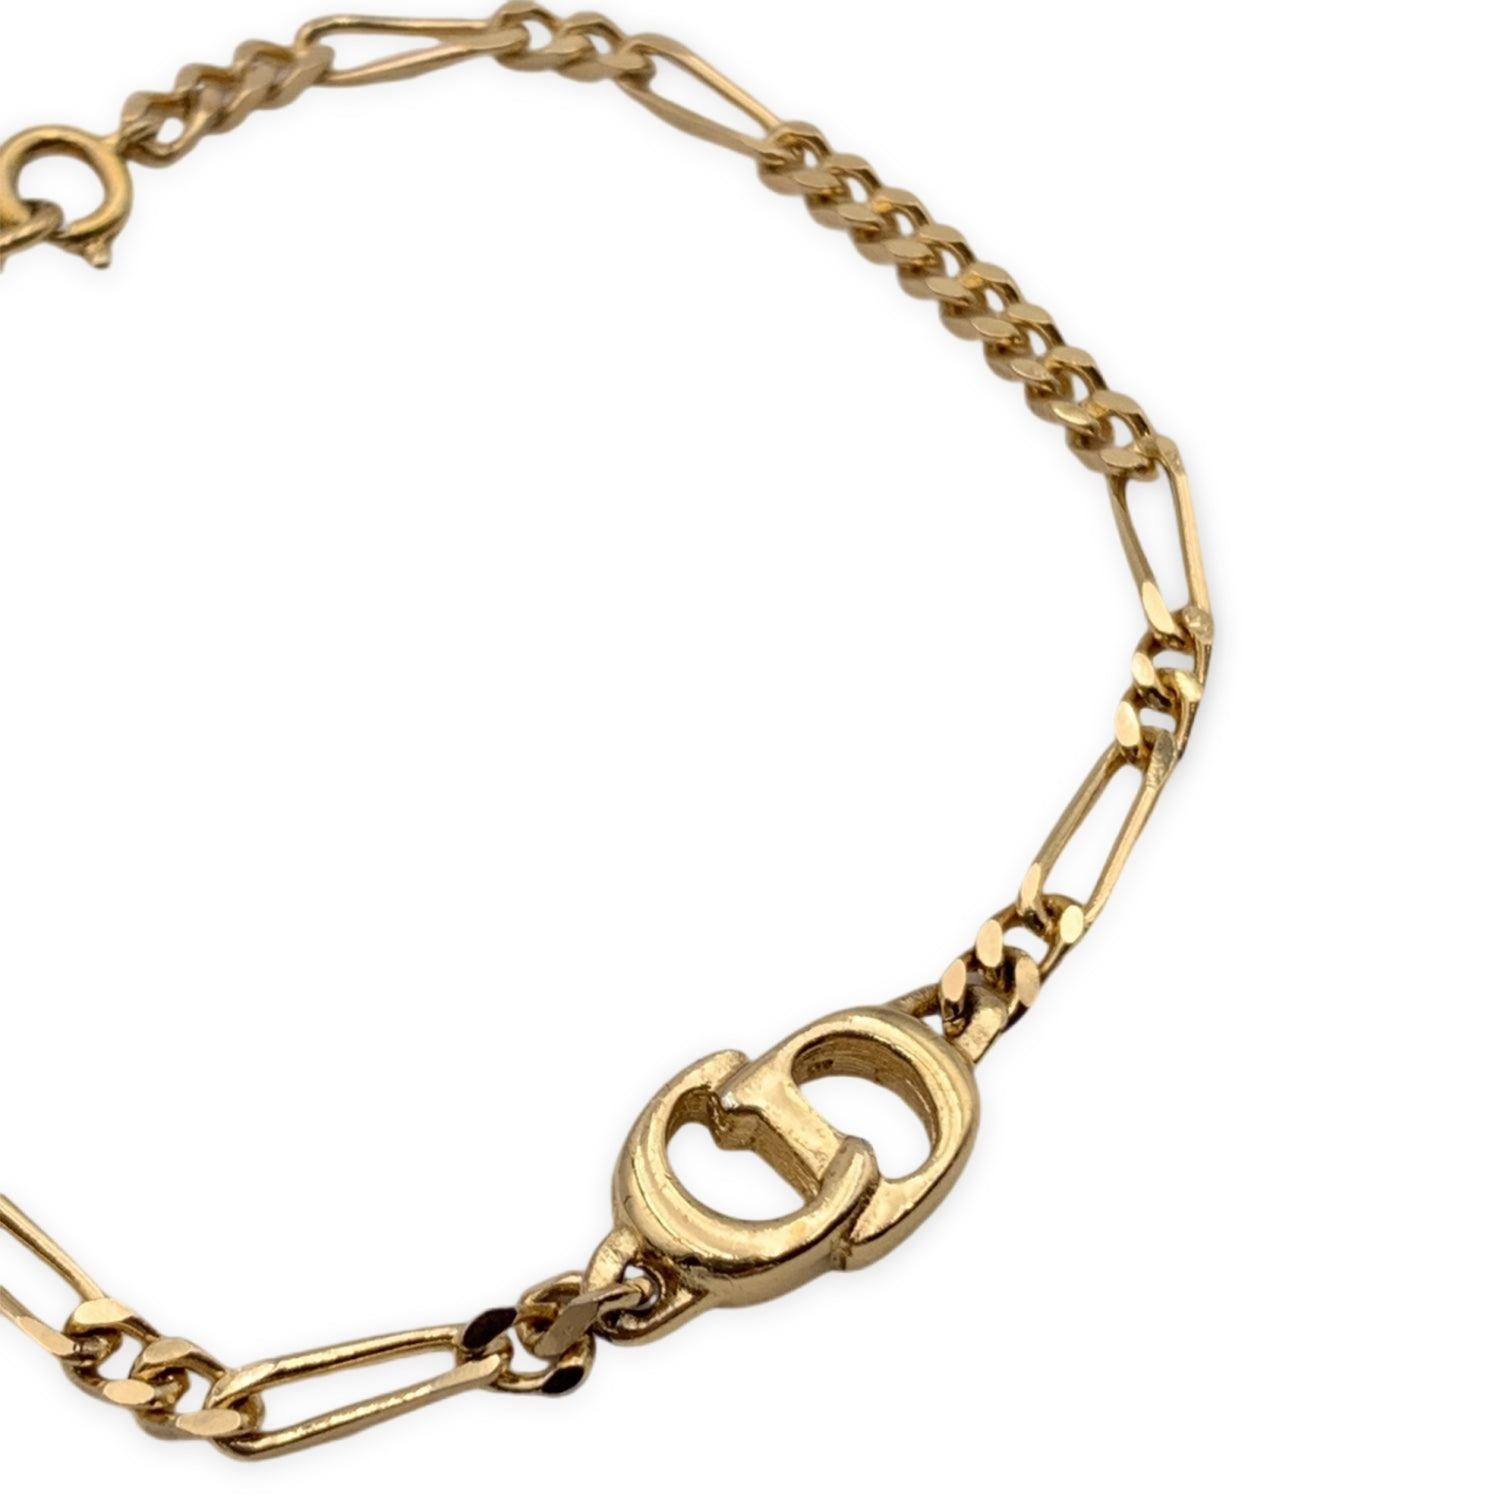 Vintage gold metal chain bracelet by CHRISTIAN DIOR. CD logo element in the center. Spring ring closure. Internal circumference: 7 inches - 17.8 cm. Condition A - EXCELLENT Gently used. Please check pictures carefully and ask for any detail